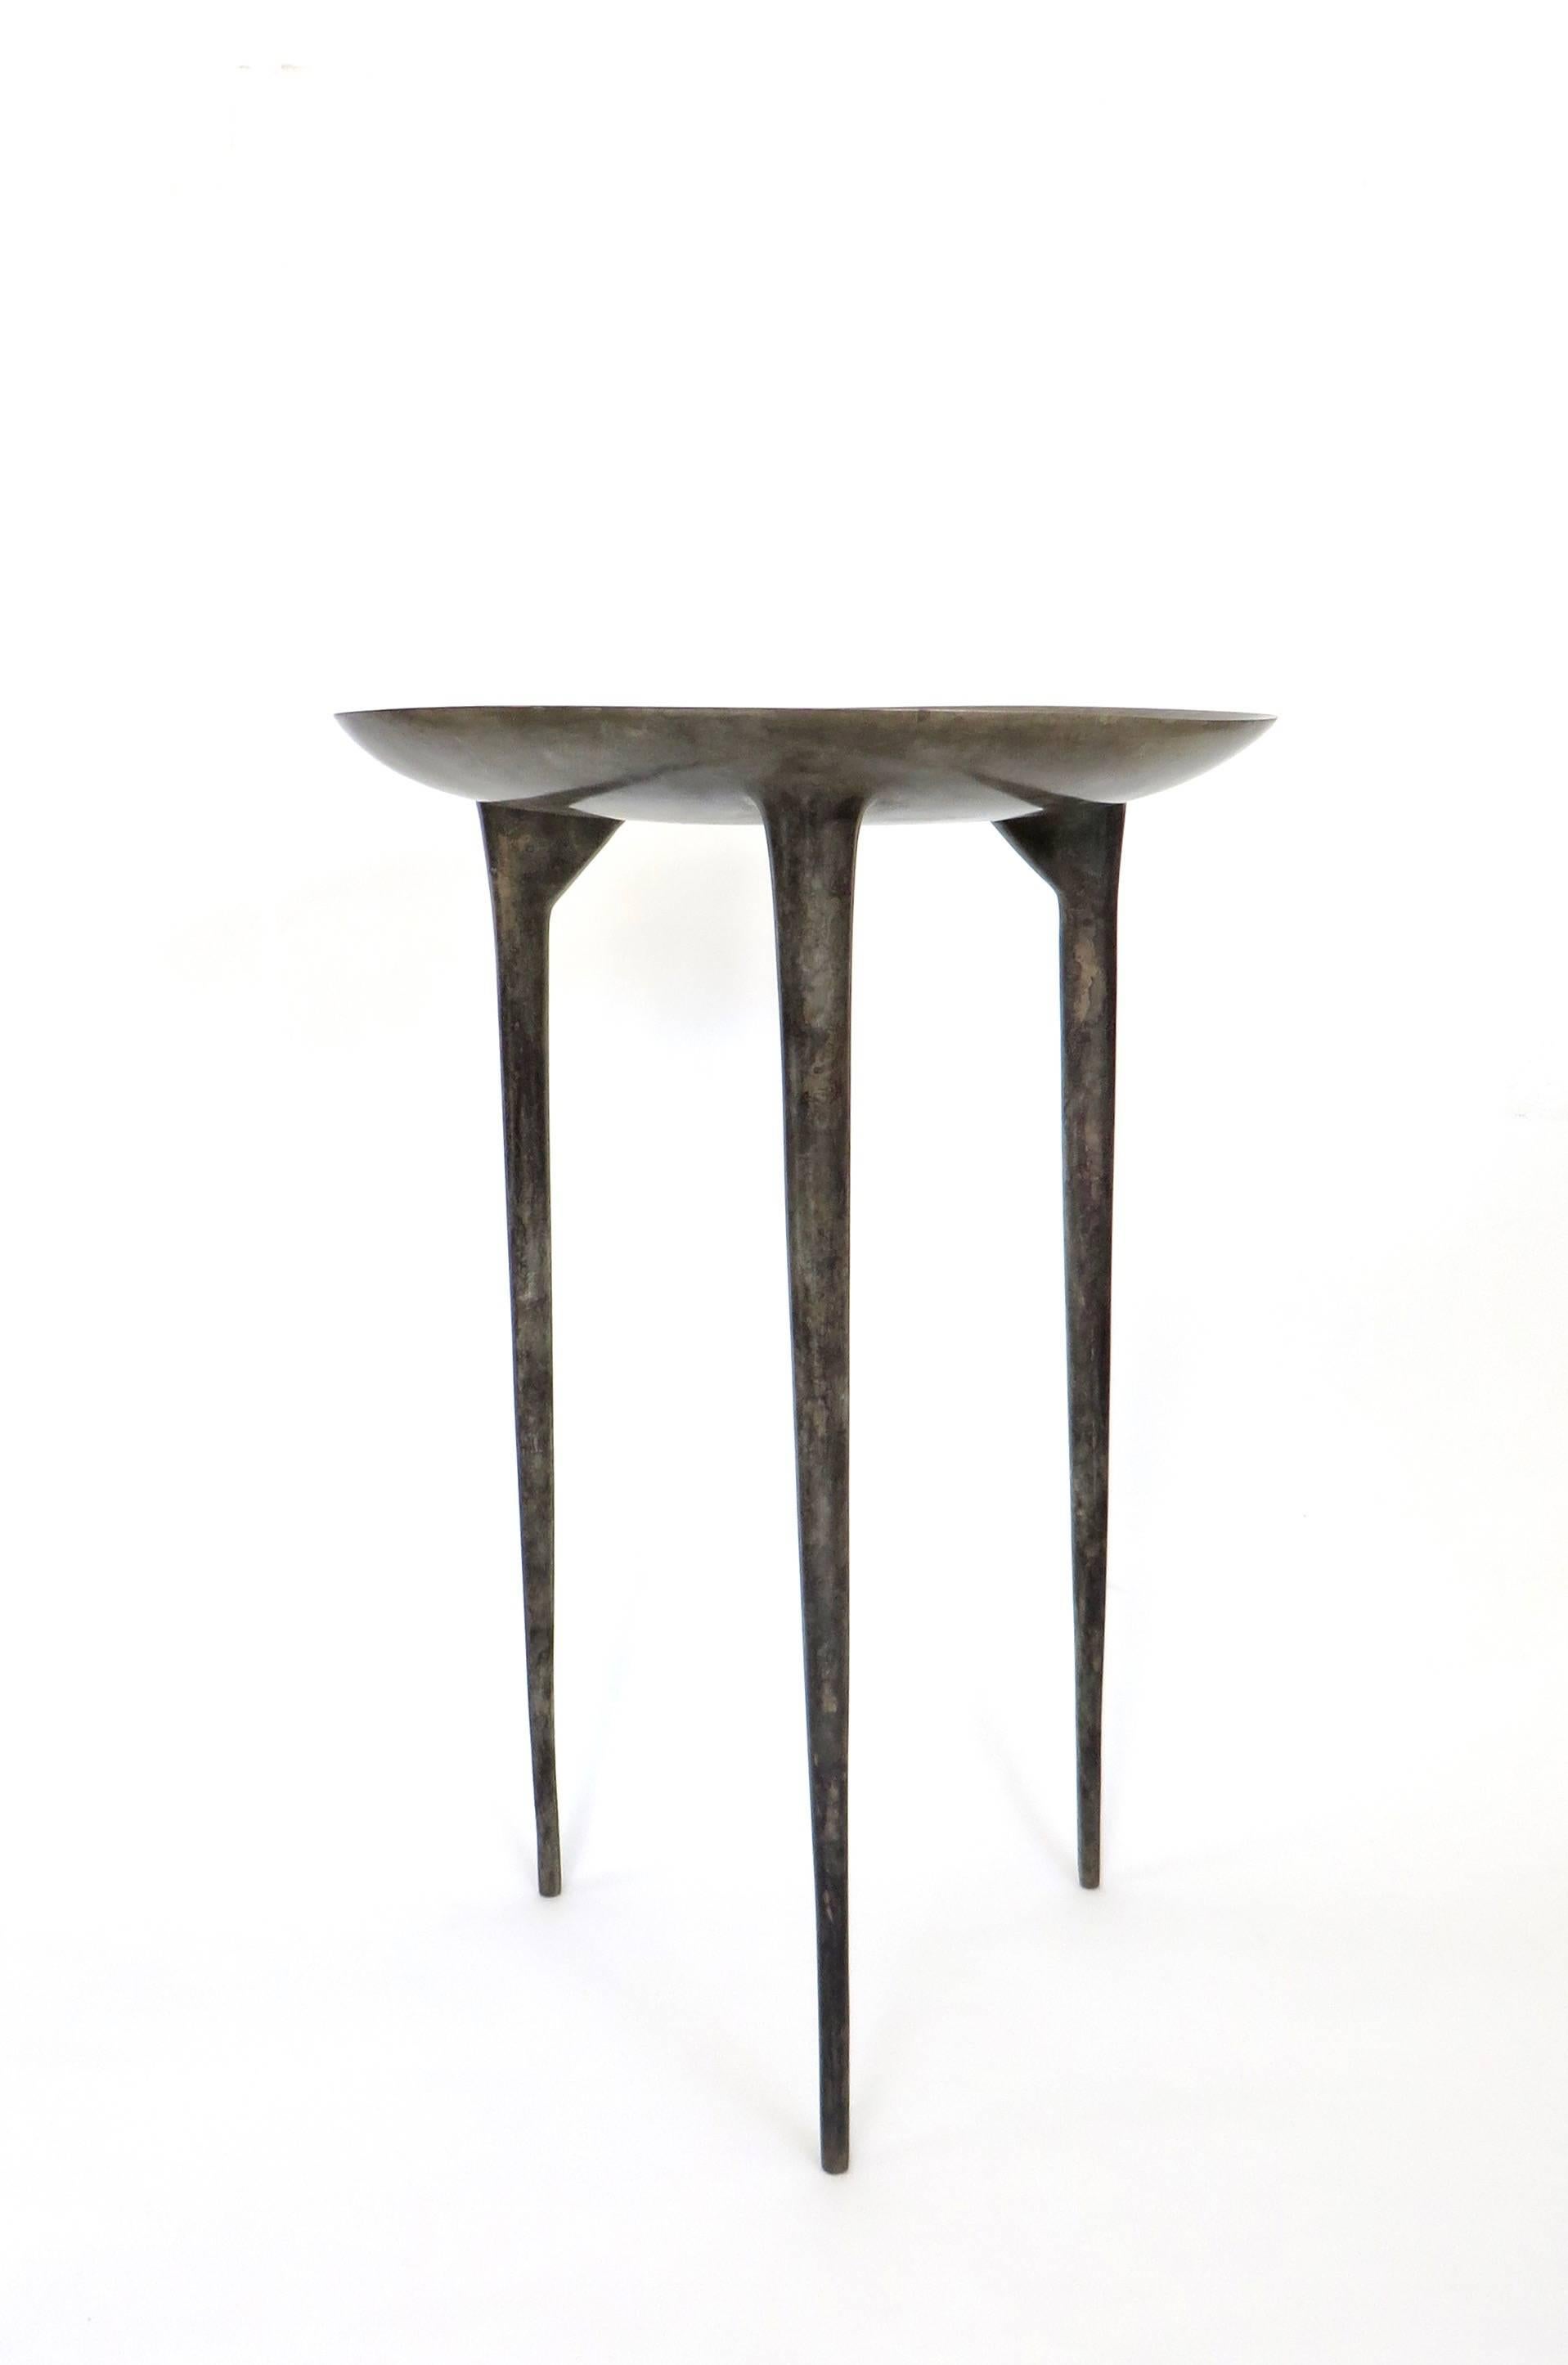 Handmade tall three-legged bronze brazier from the Rick Owens home collection. 'Tall Brazier' three-legged table in solid bronze with nitrate finish. Shown is the nitrate finish. 
Please note the lead time is 8 weeks after payment. 
The tall brazier